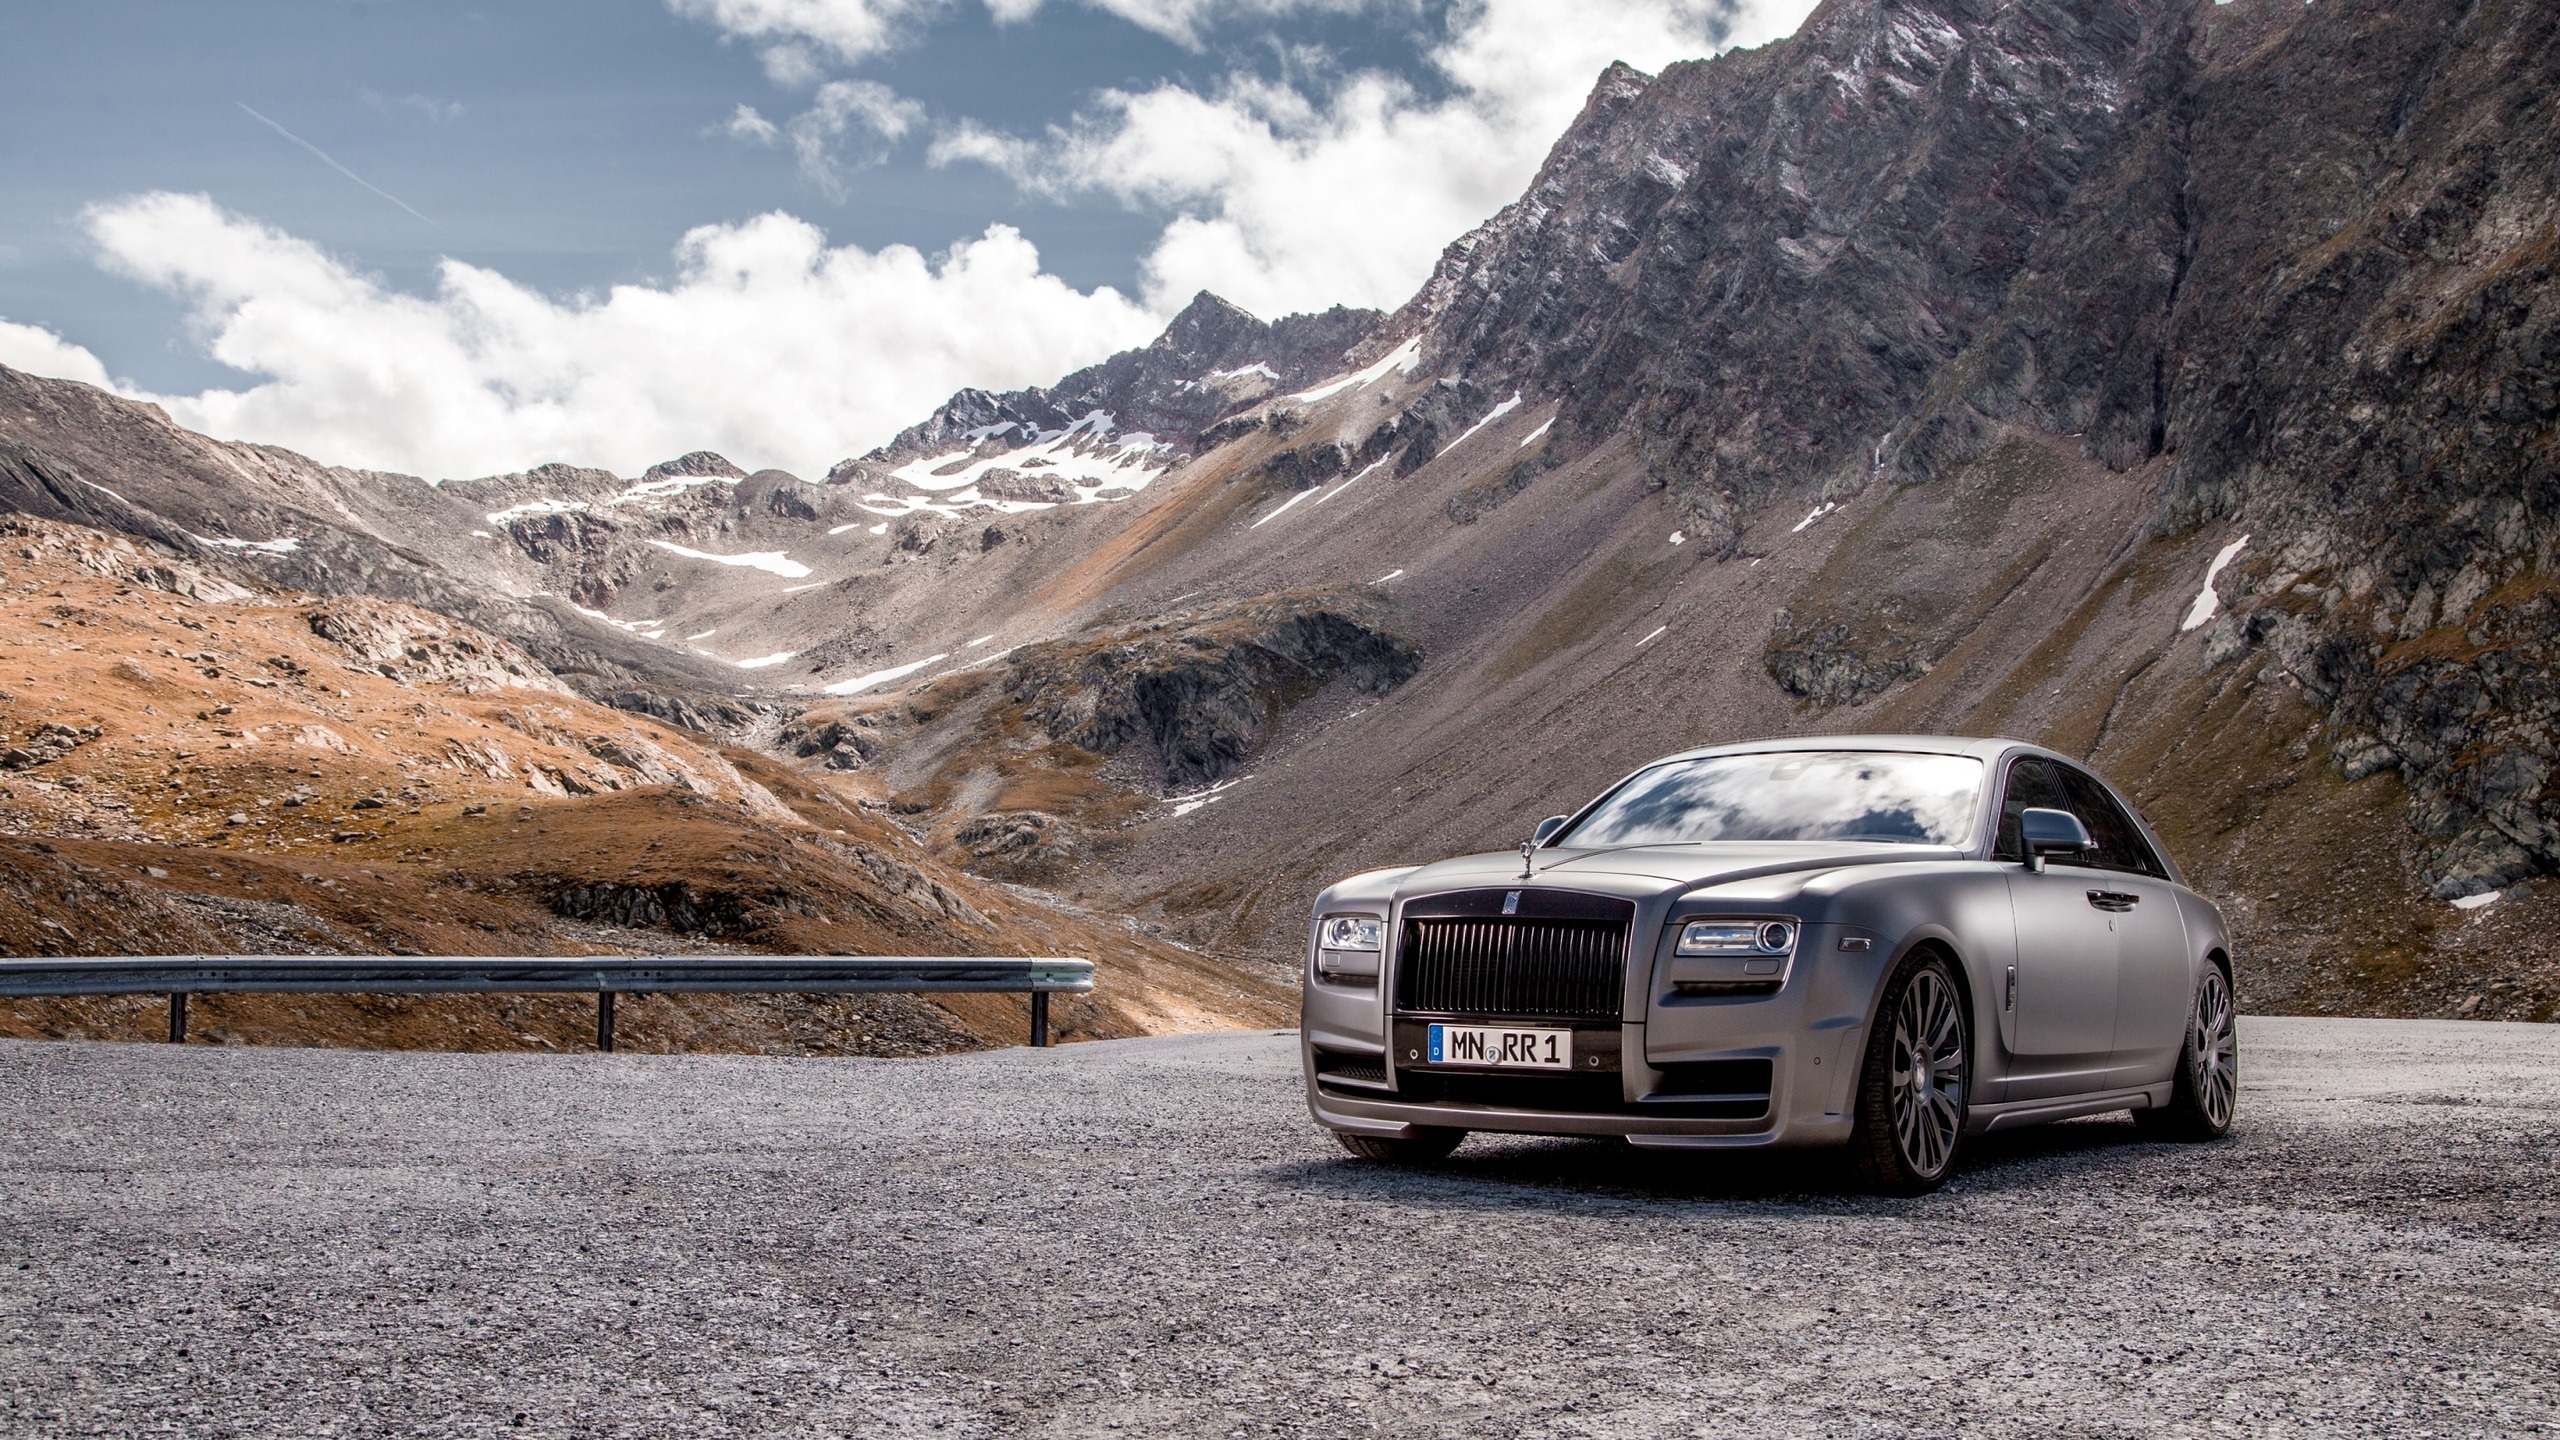 Gorgeous Rolls-Royce Ghost for 2560x1440 HDTV resolution